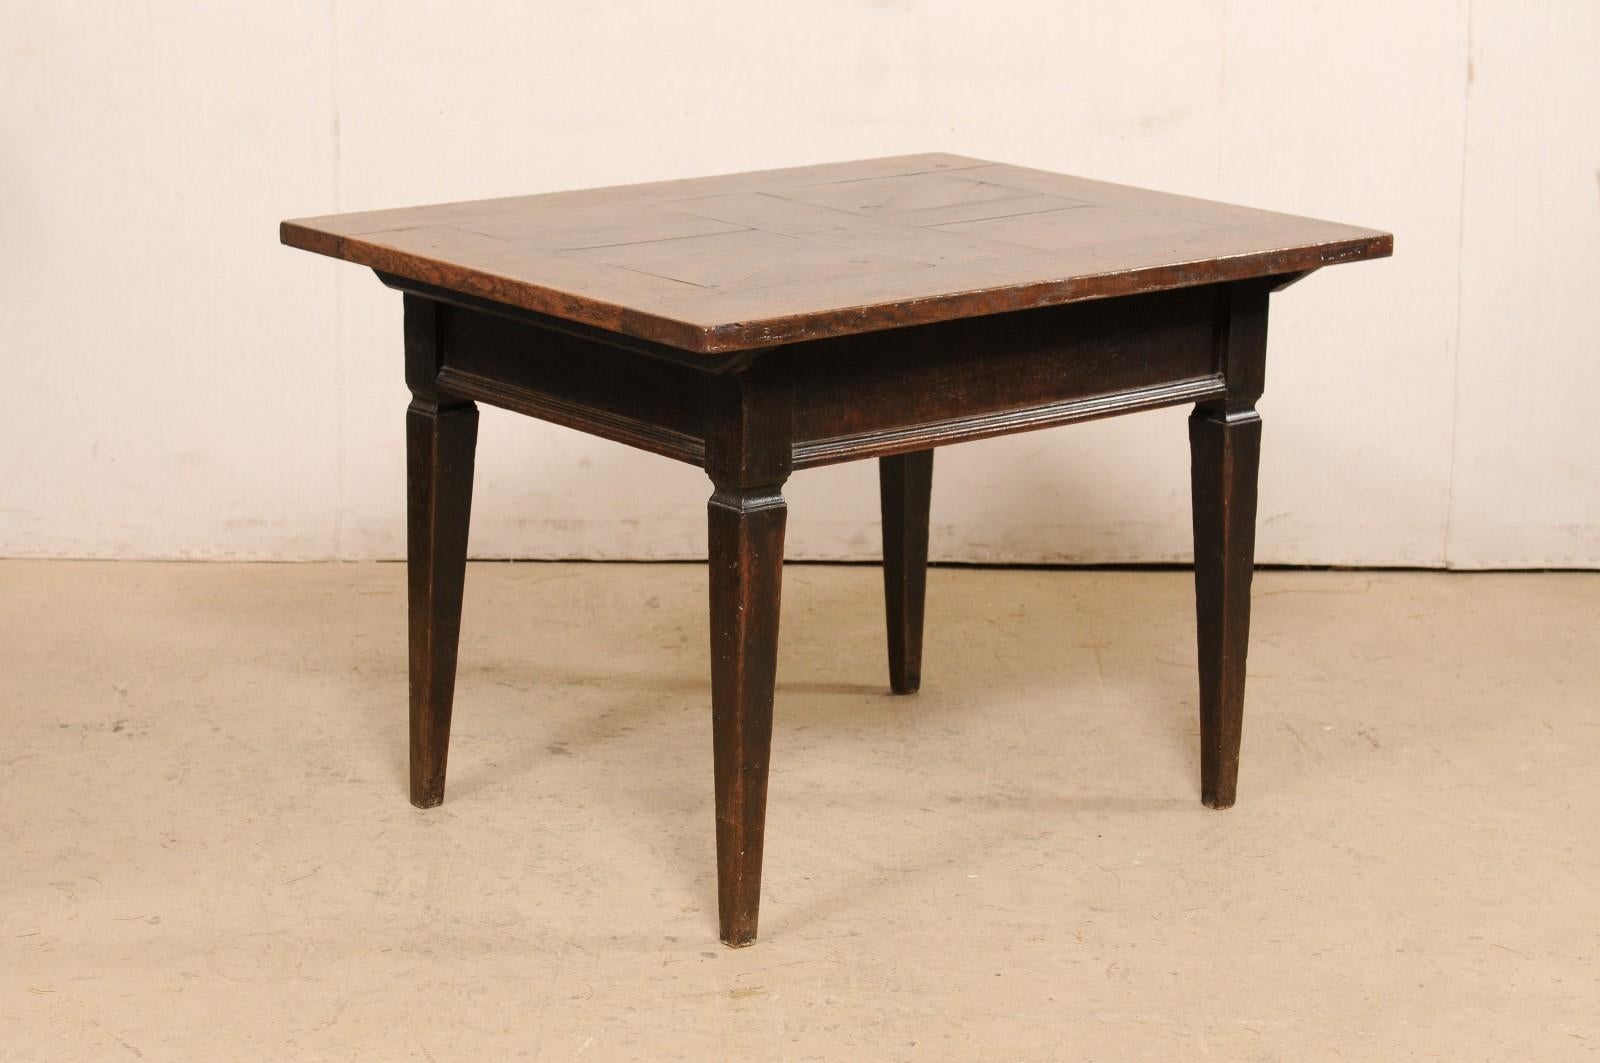 18th C. French Occasional Table w/ Star Accent Medallion Inlay at Top For Sale 3